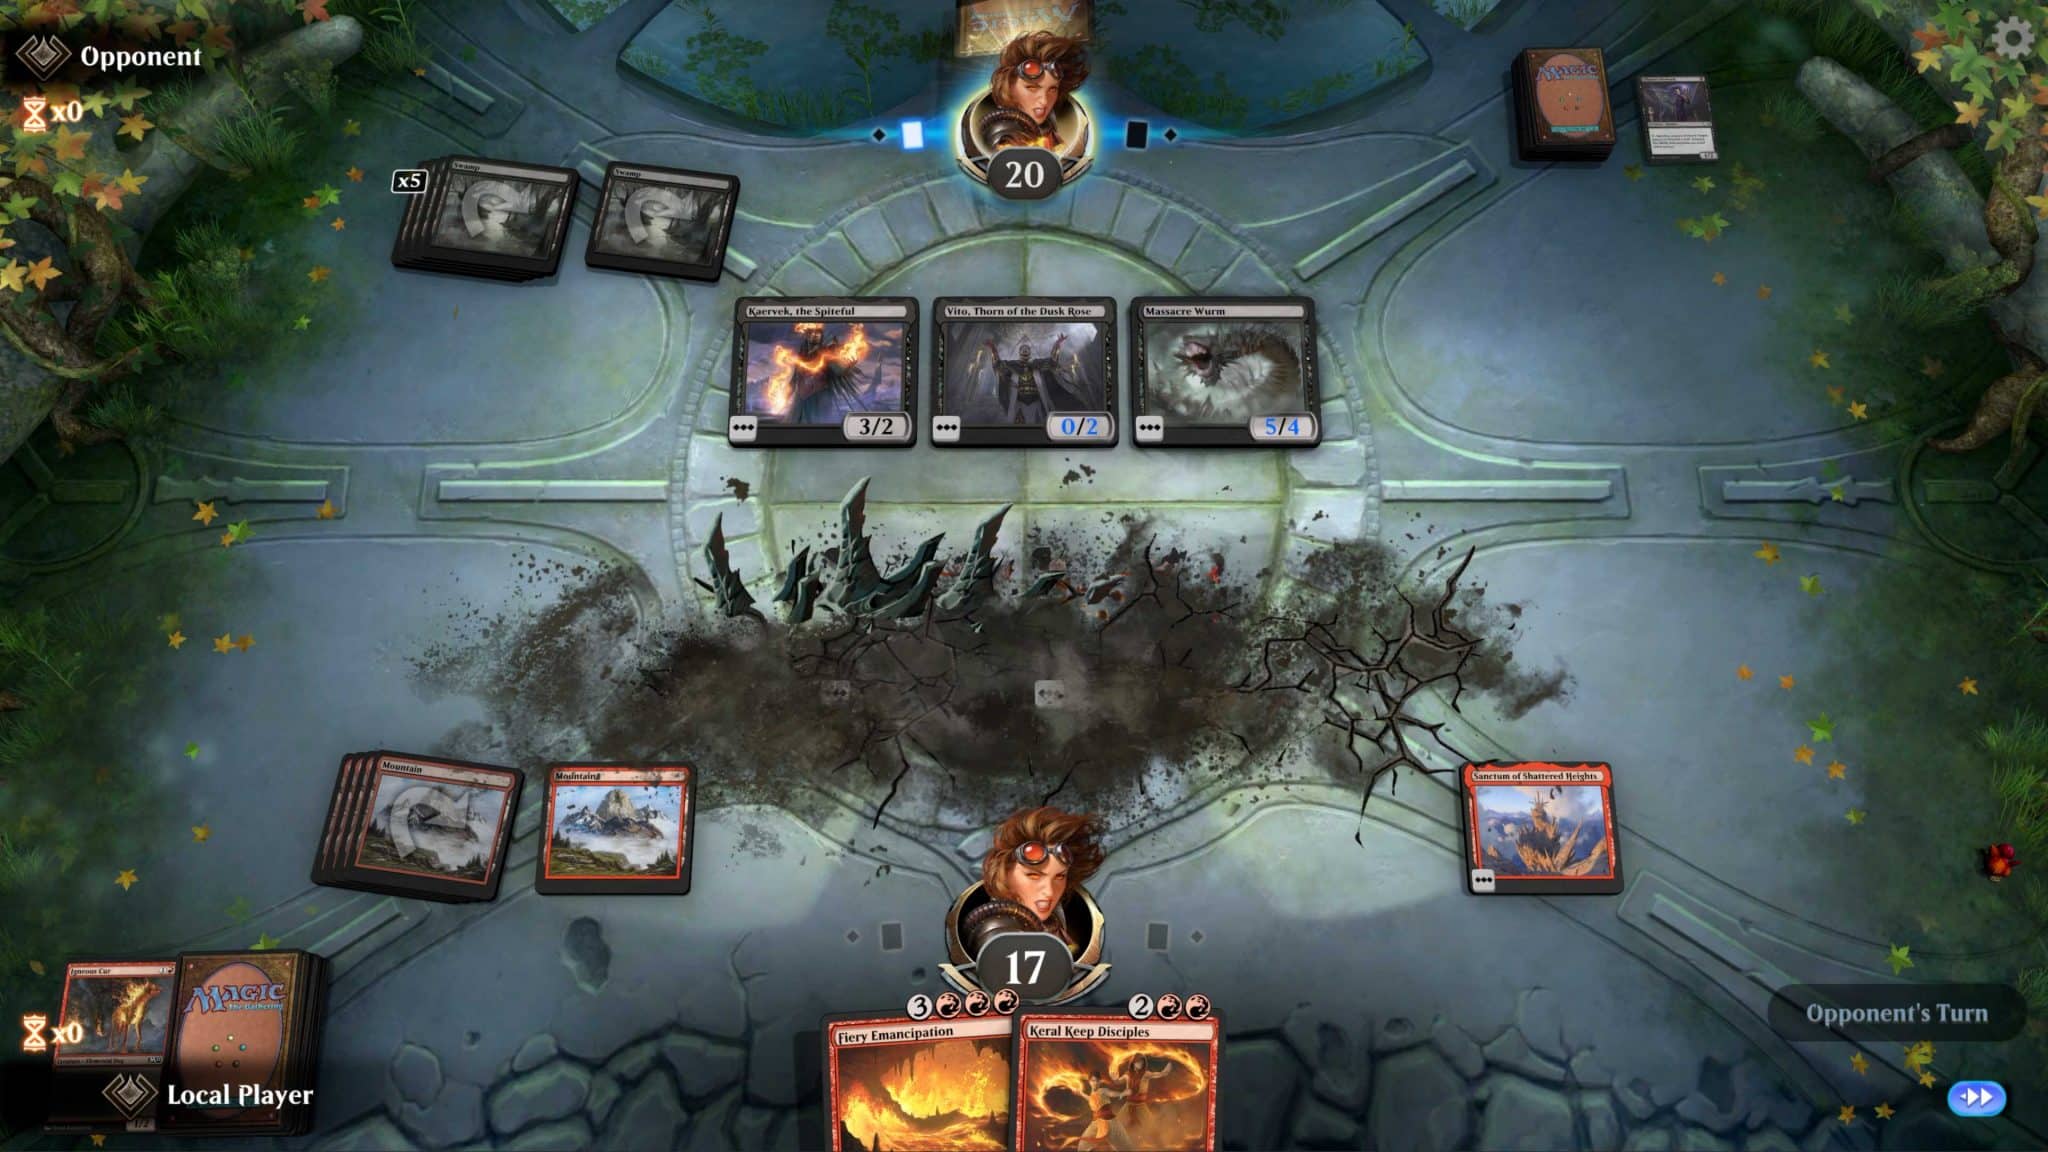 An image of gameplay in Magic The Gathering Arena